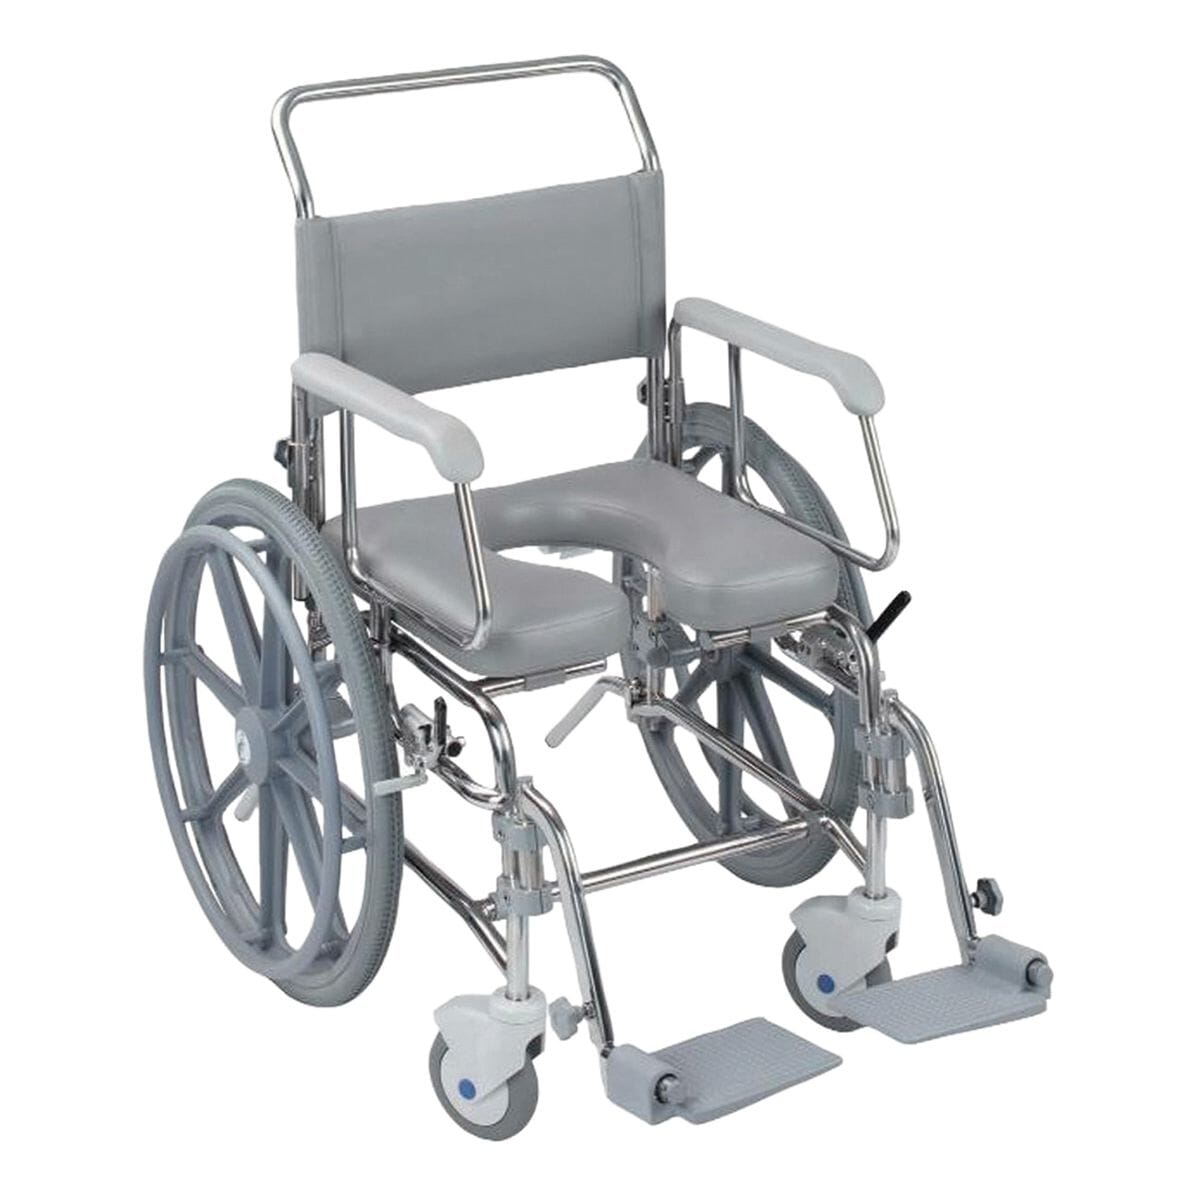 View Transaqua TA5 Self Propelled Shower Commode Chair Seat Width 19 information